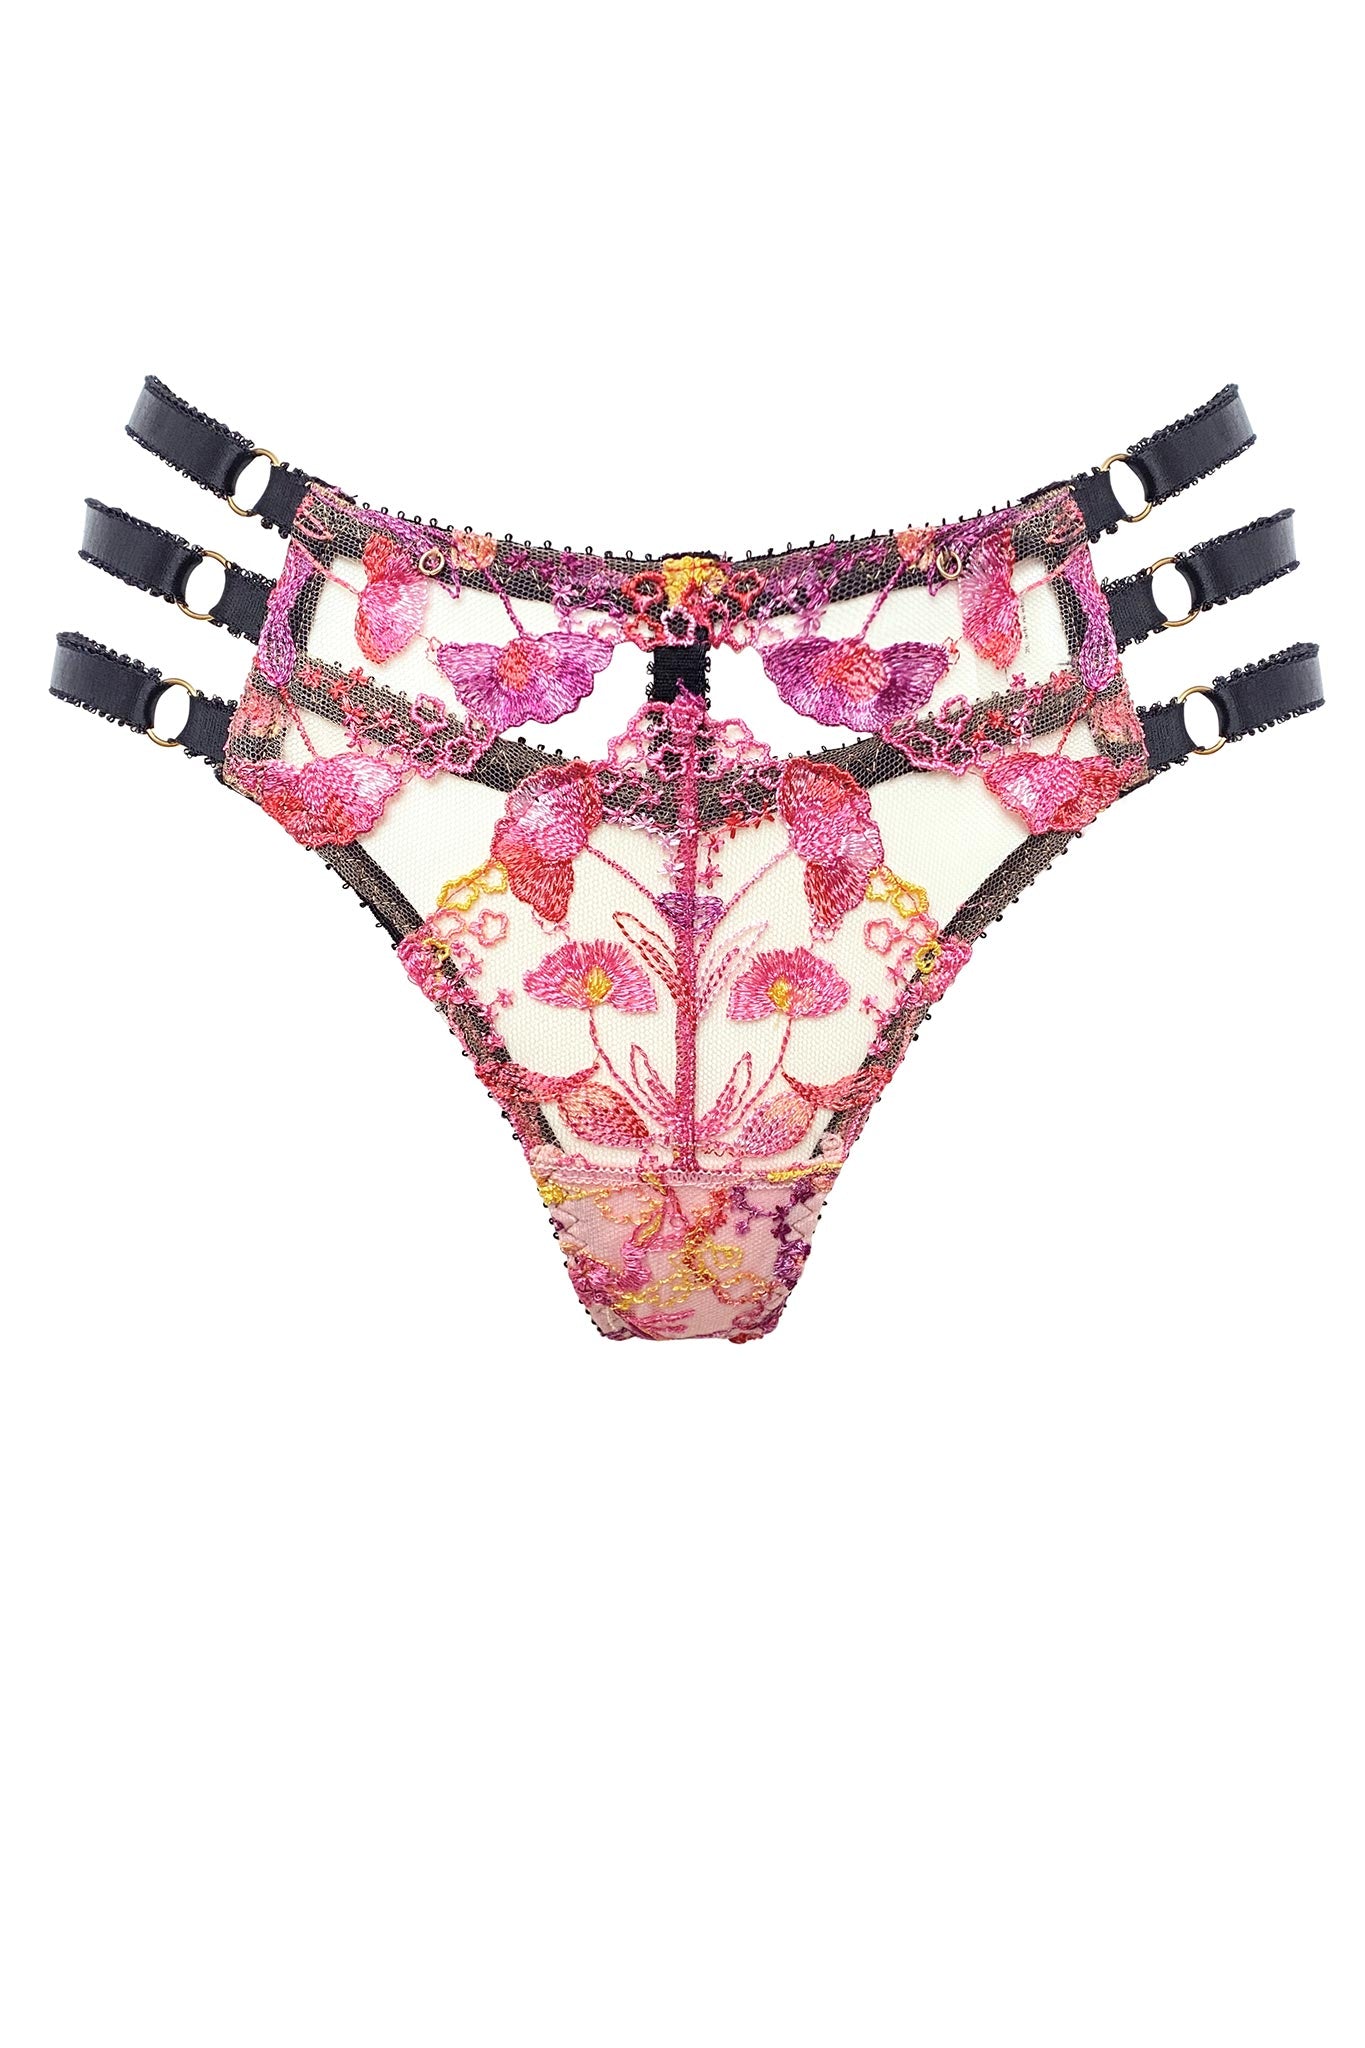 Victoria's Secret Love Pink Printed Luxurious Panty